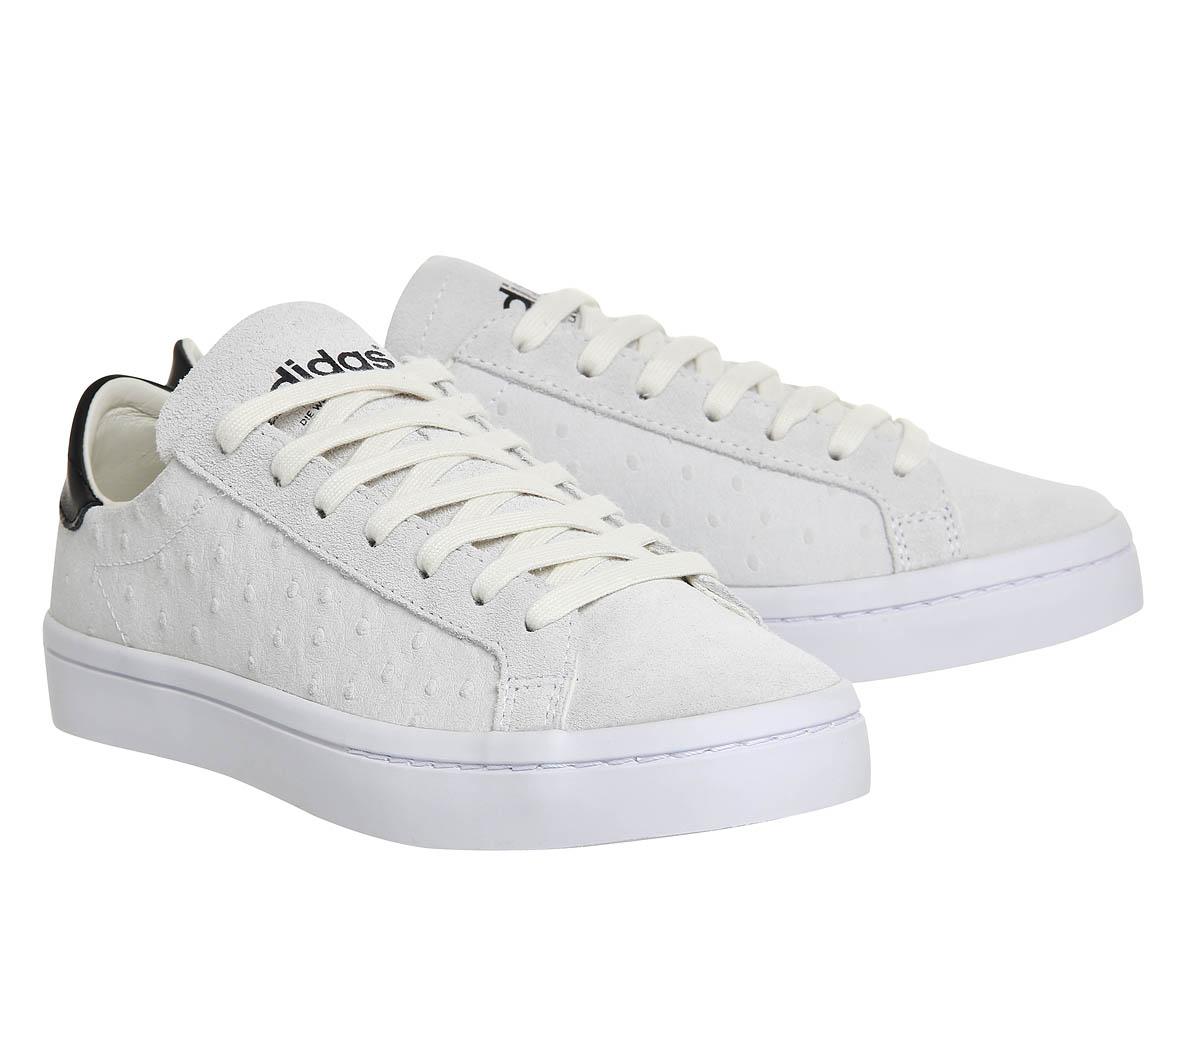 adidas Originals Court Vantage W Perforated Leather Sneakers in ...